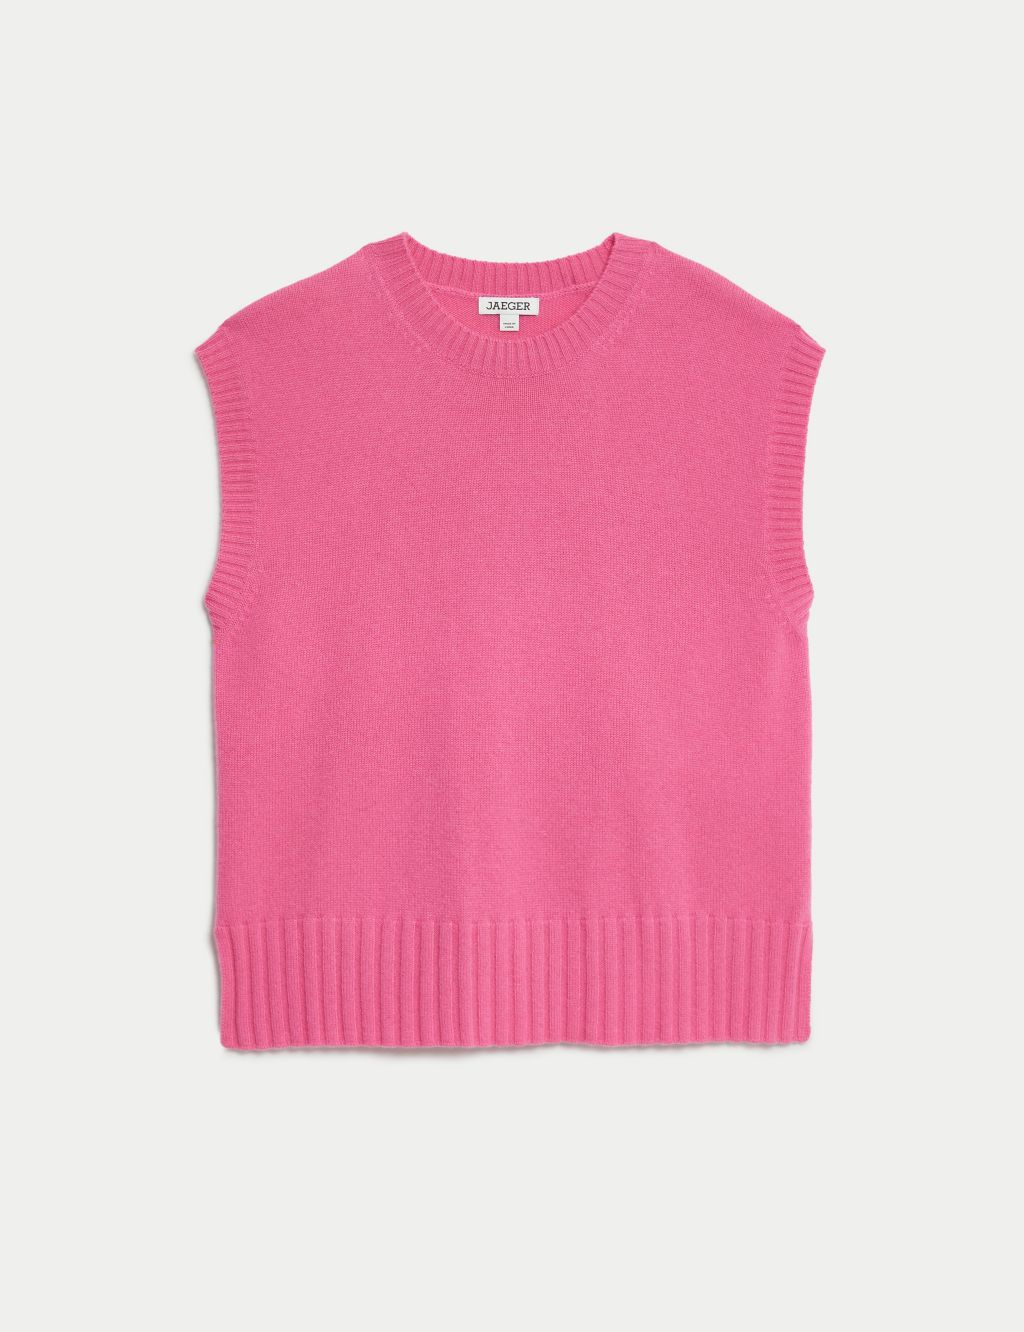 Pure Cashmere Crew Neck Knitted Vest image 2